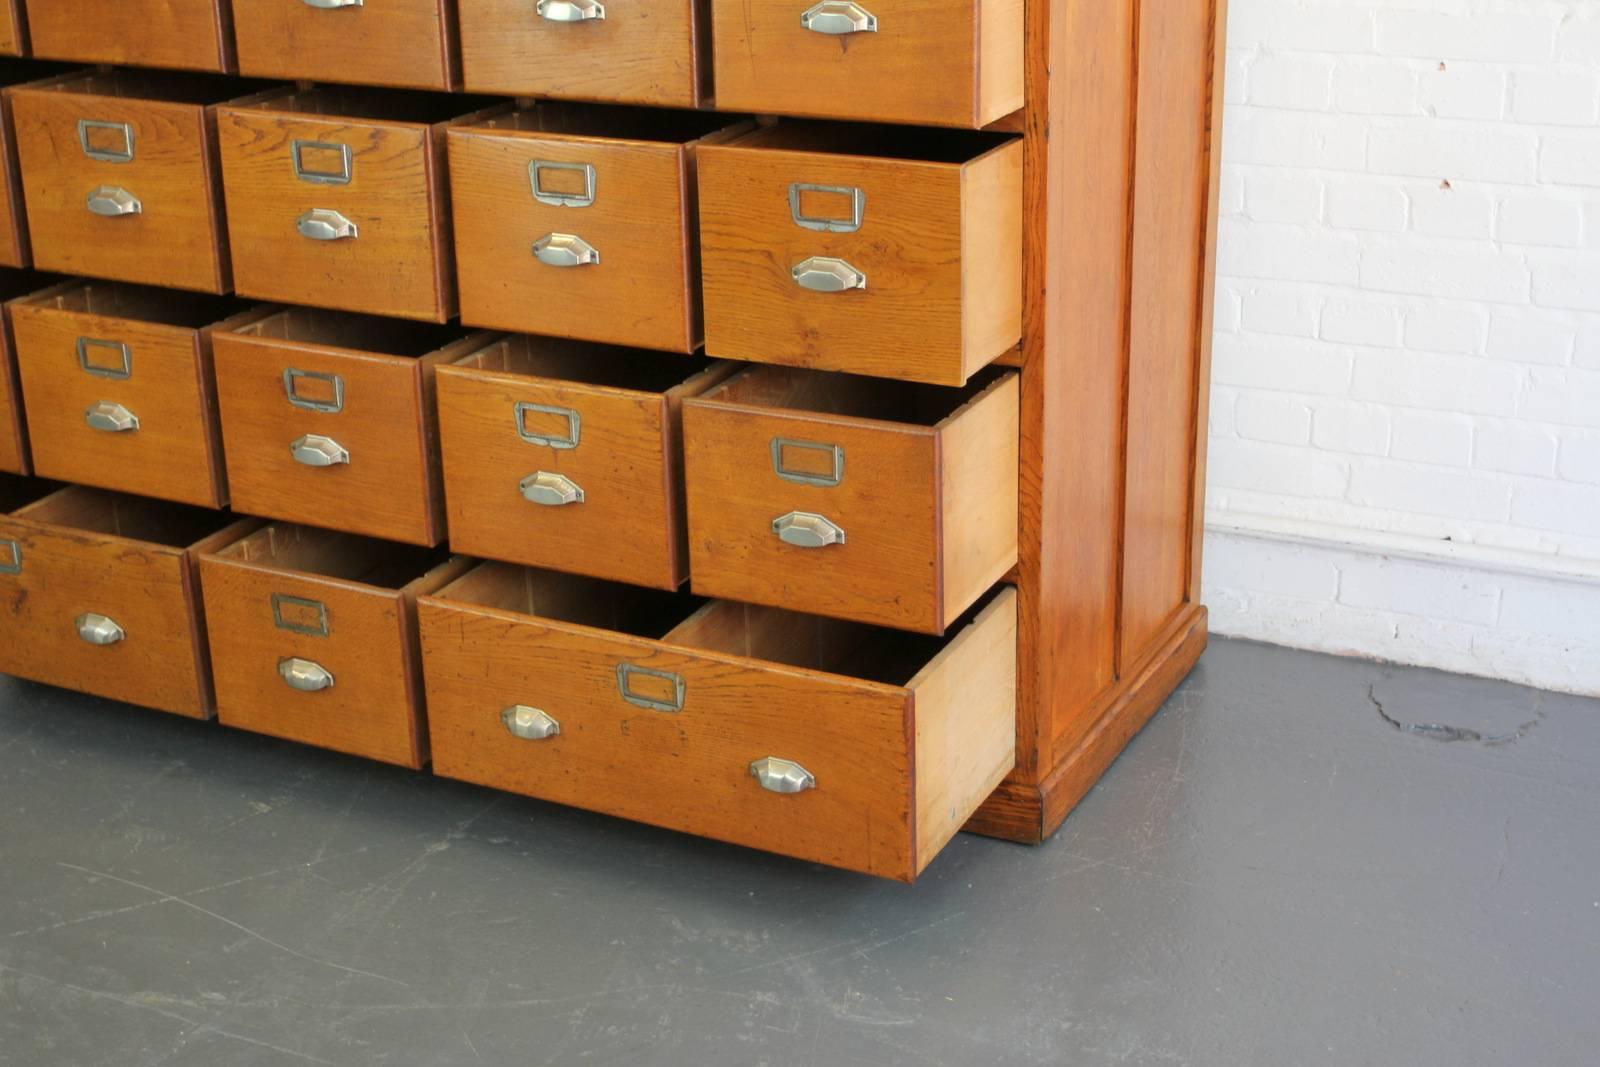 Large bank of French Art Deco filing drawers, circa 1930s

- Solid oak drawers and frame
- Oak ply panels on the sides
- Geometric cup handles
- 21 small drawers and two large
- French, circa 1930s
- Measures: 173 cm wide x 66 cm deep x 149